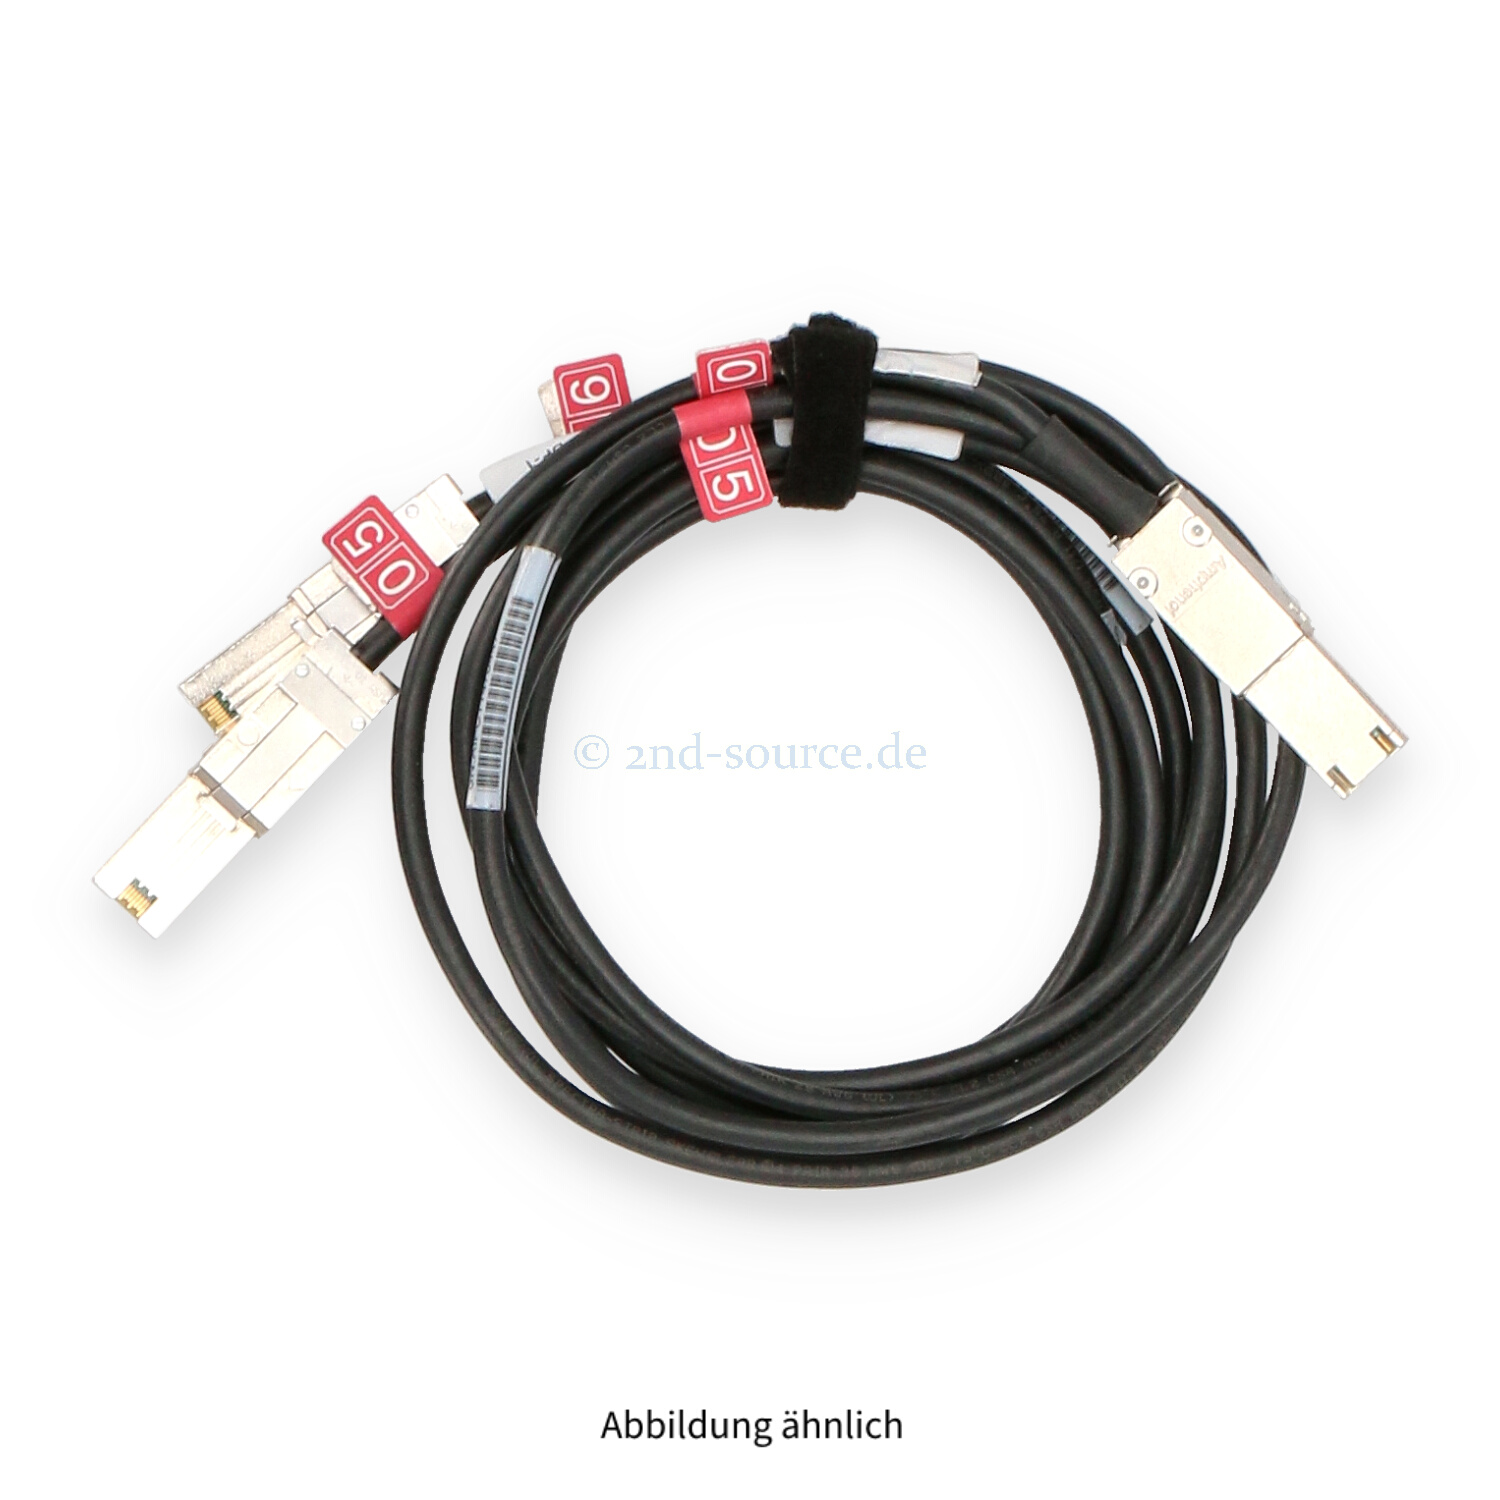 HPE 2.0m 1xSFF-8088 to 2xSFF-8088 SAS Splitter Cable EVA P6000 583399-001 588043-003